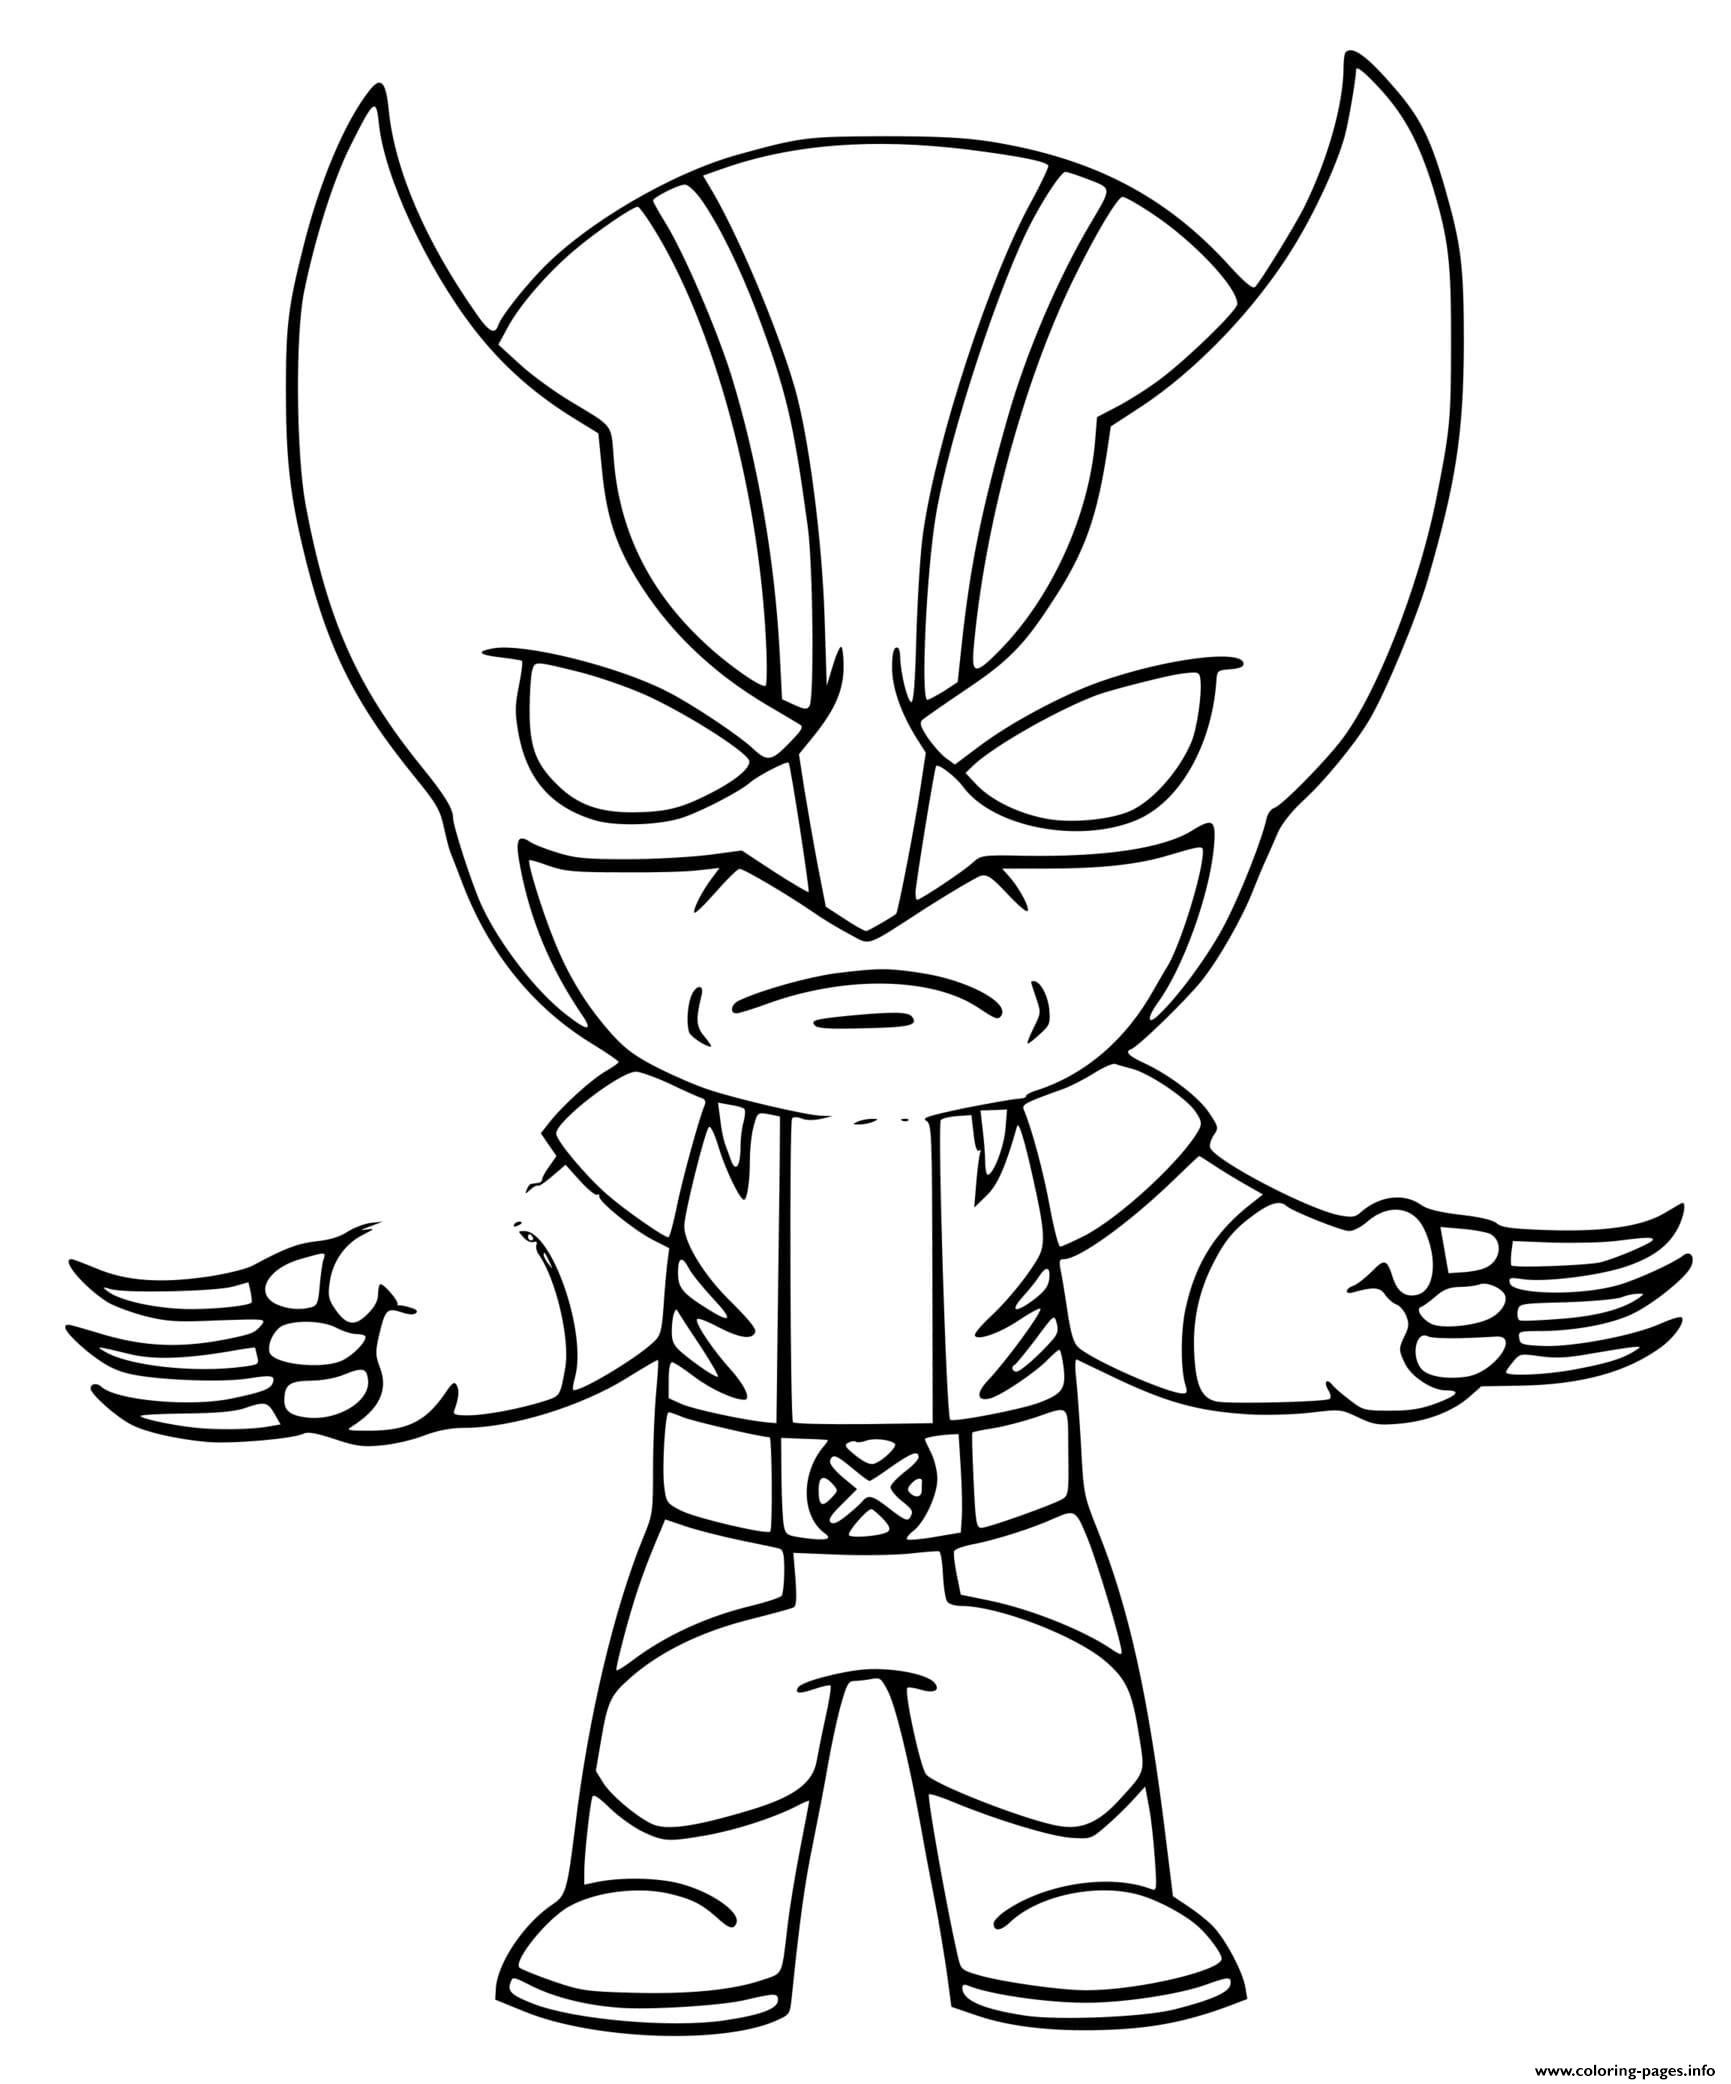 Wolverine Fortnite Coloring Pages Printable Here's how to complete all of them. wolverine fortnite coloring pages printable